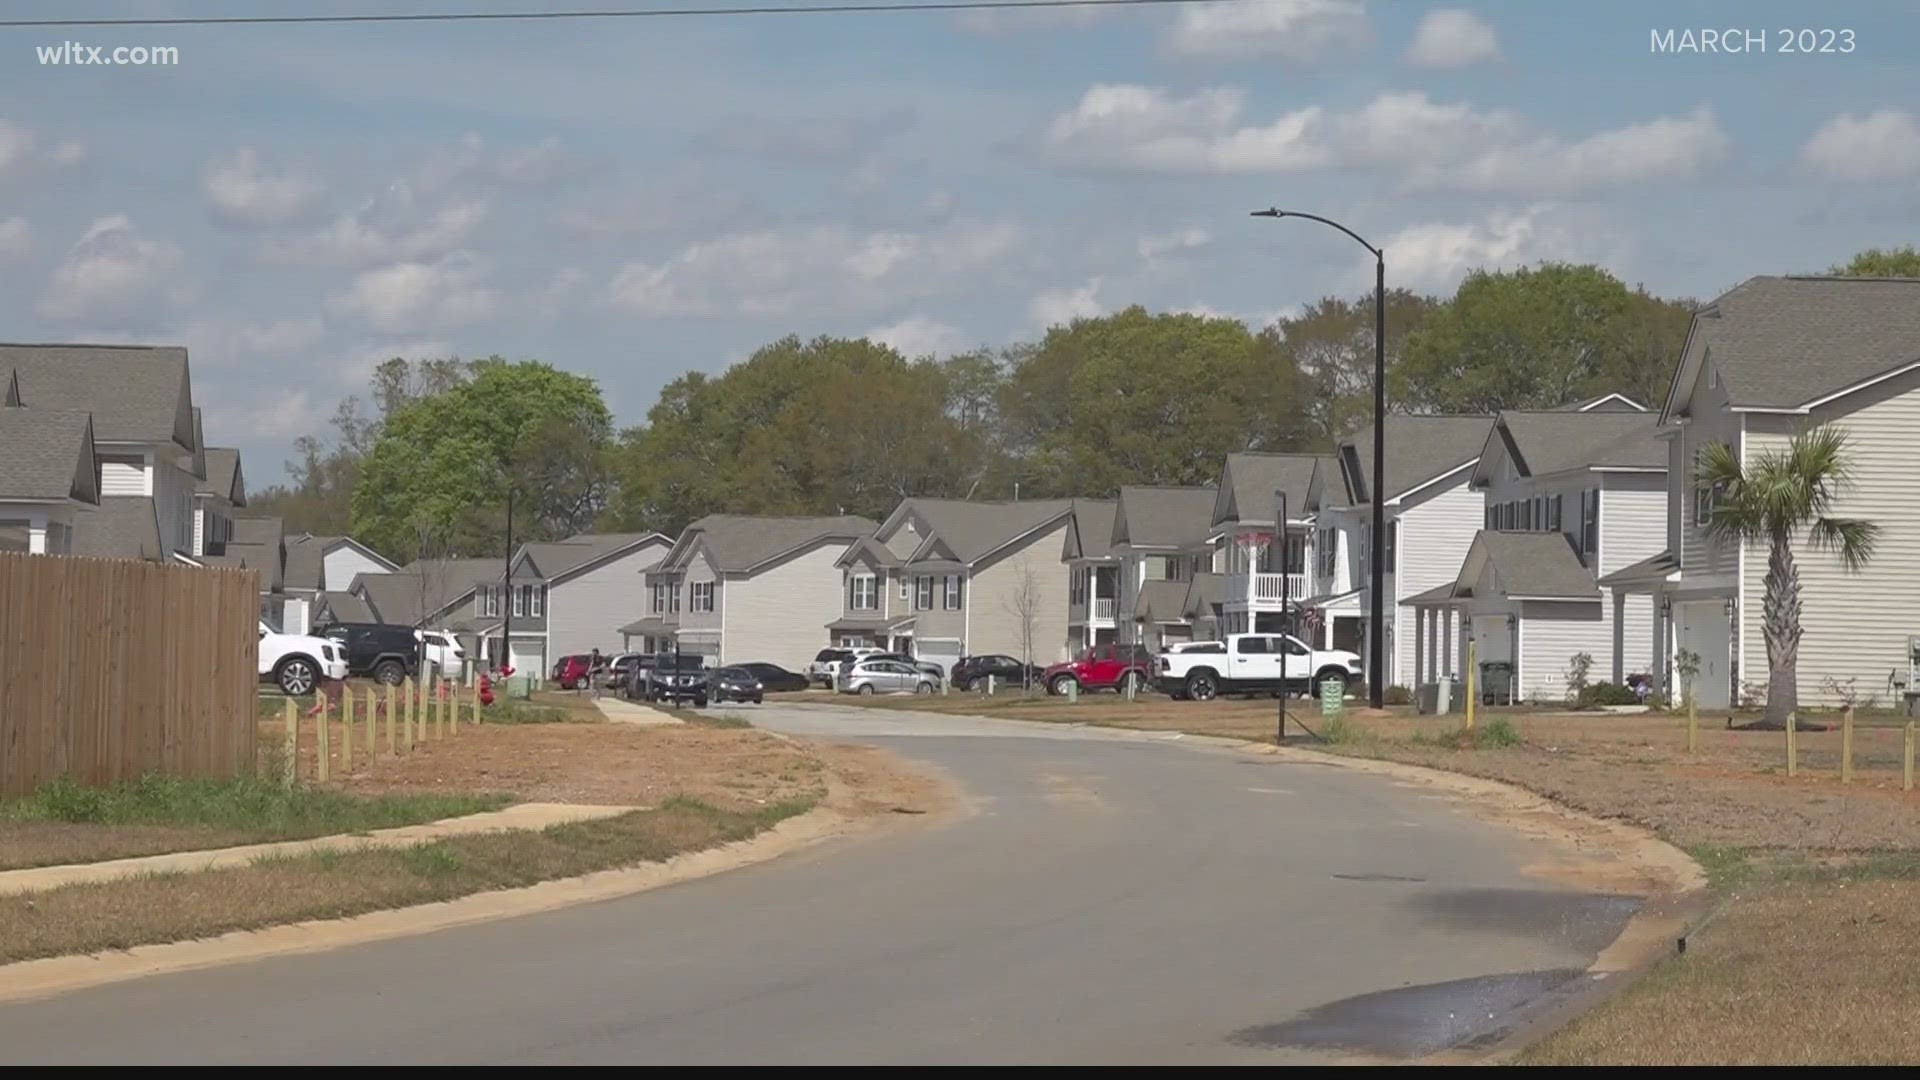 The report is shedding light on the crime rate in Sumter, including an alarming rise in the numbers of murders there.